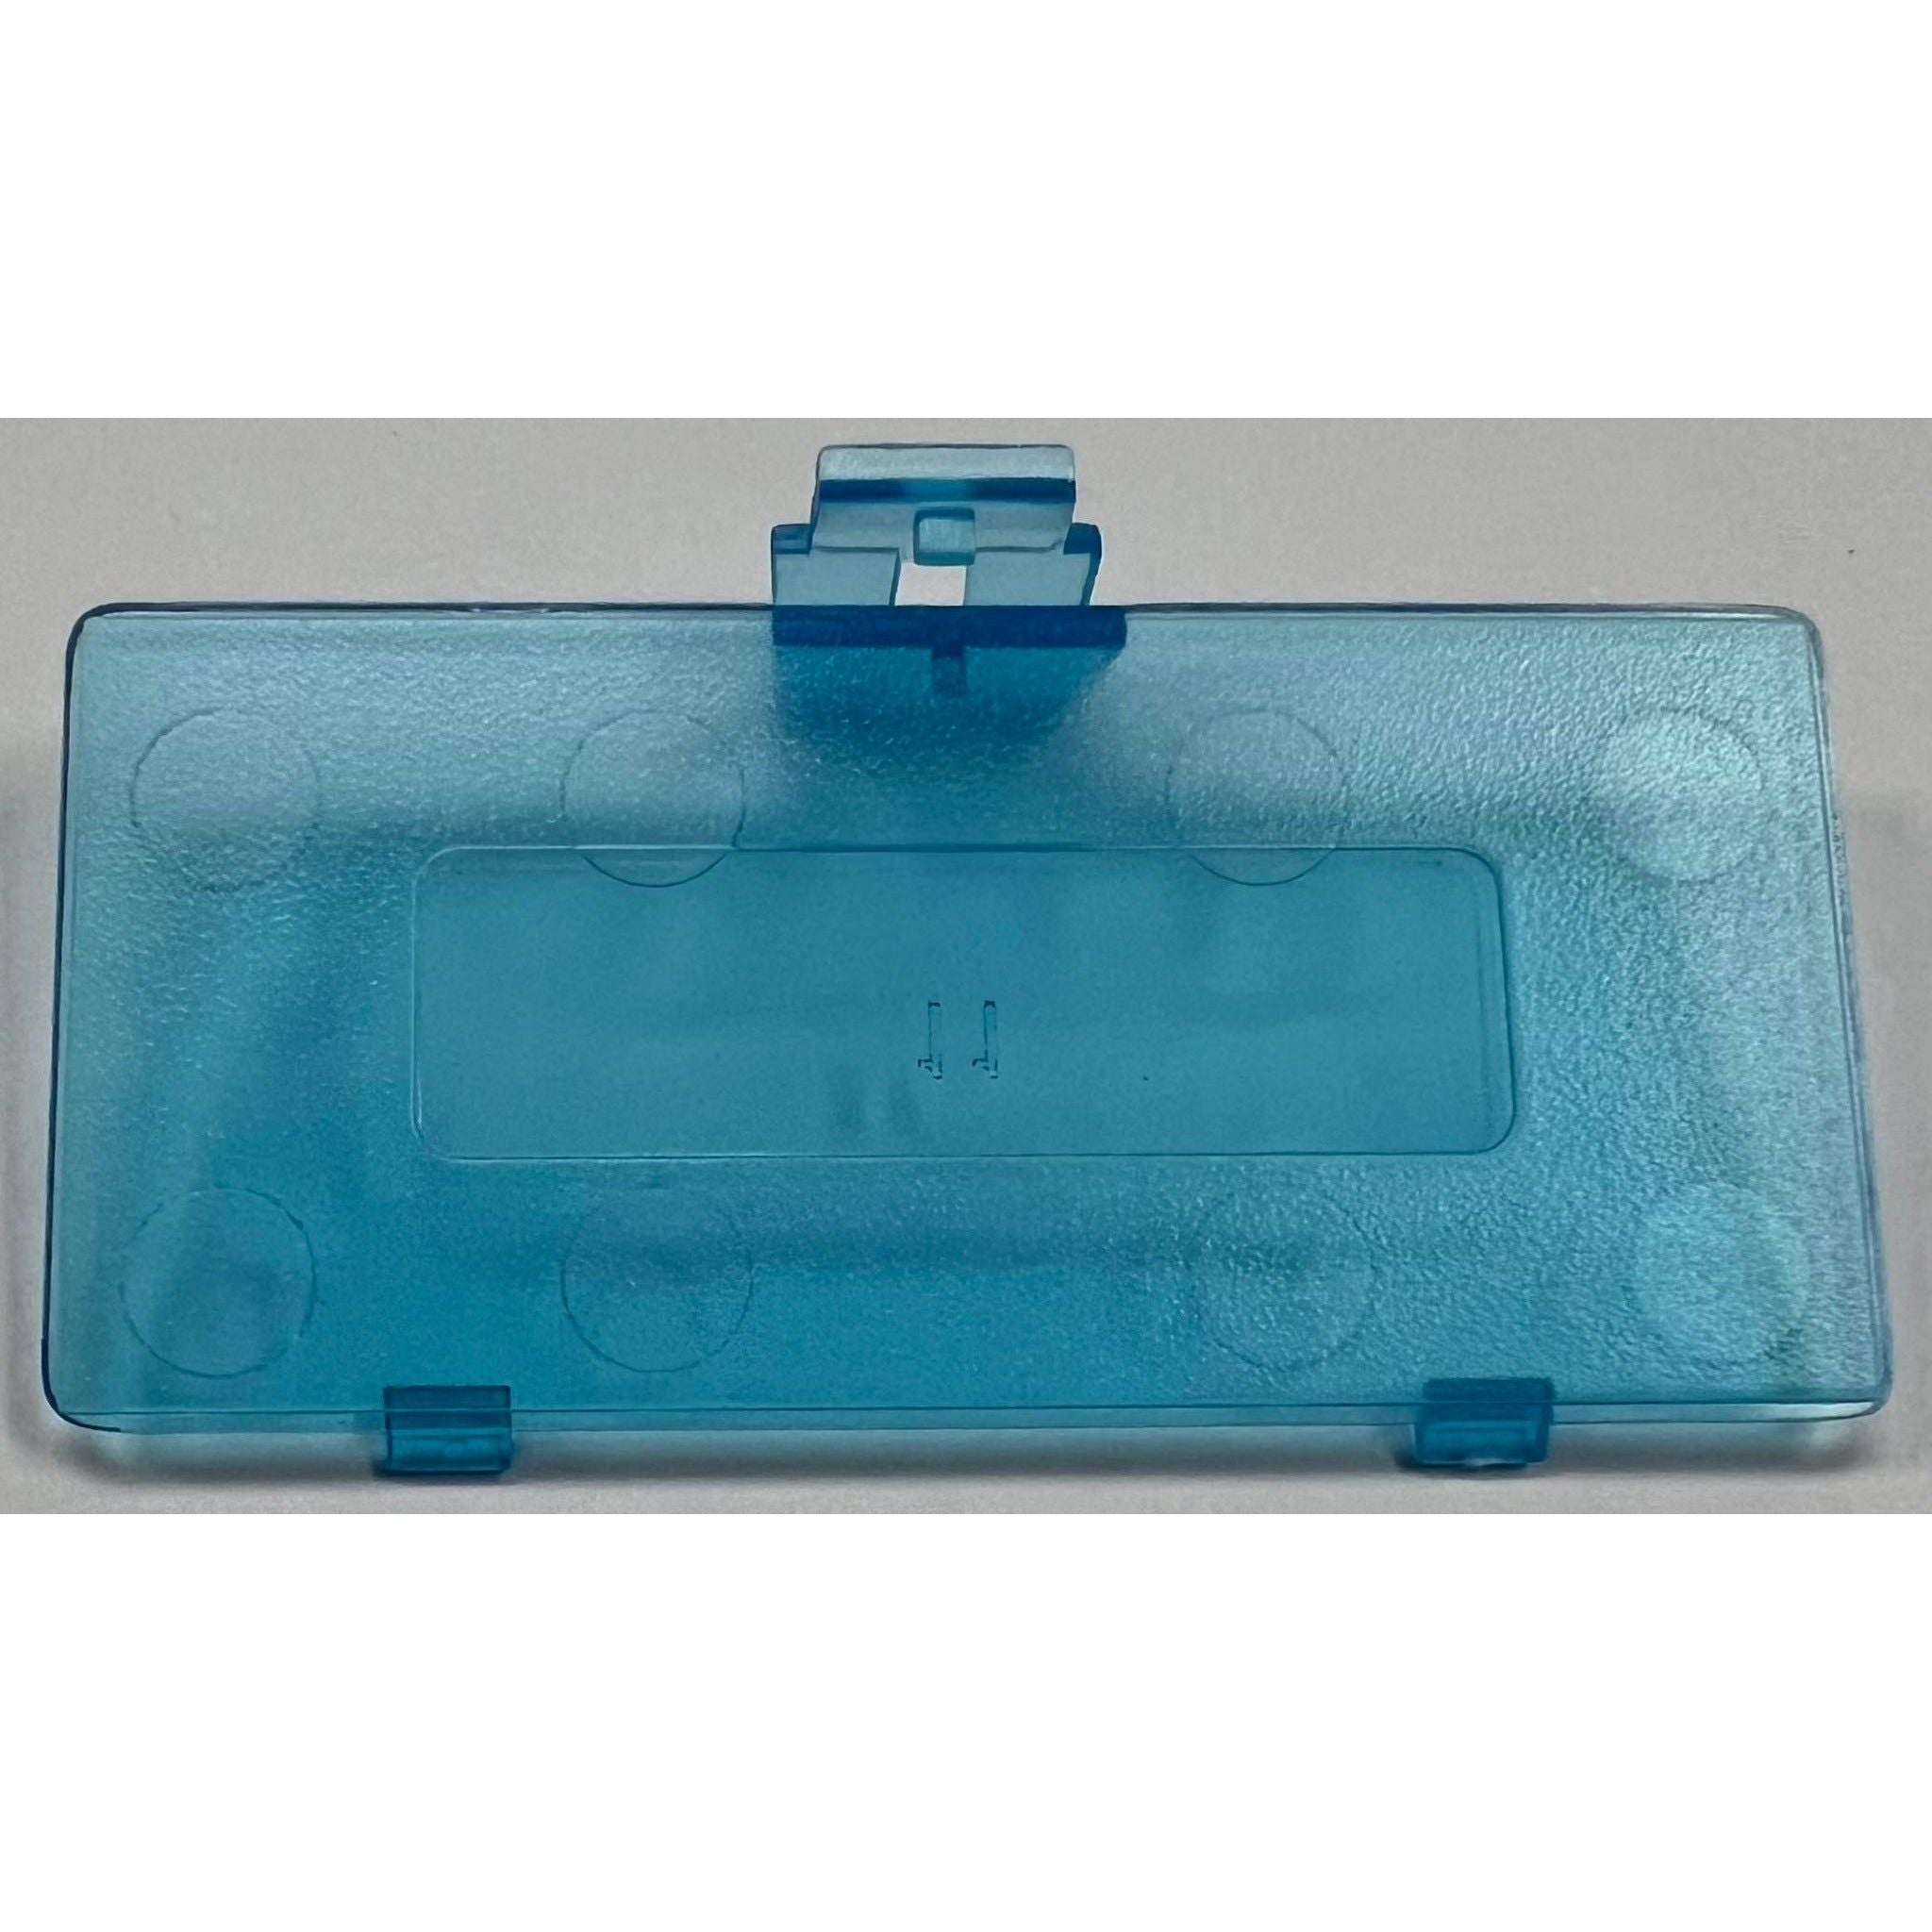 Gameboy Pocket Replacement Battery Cover